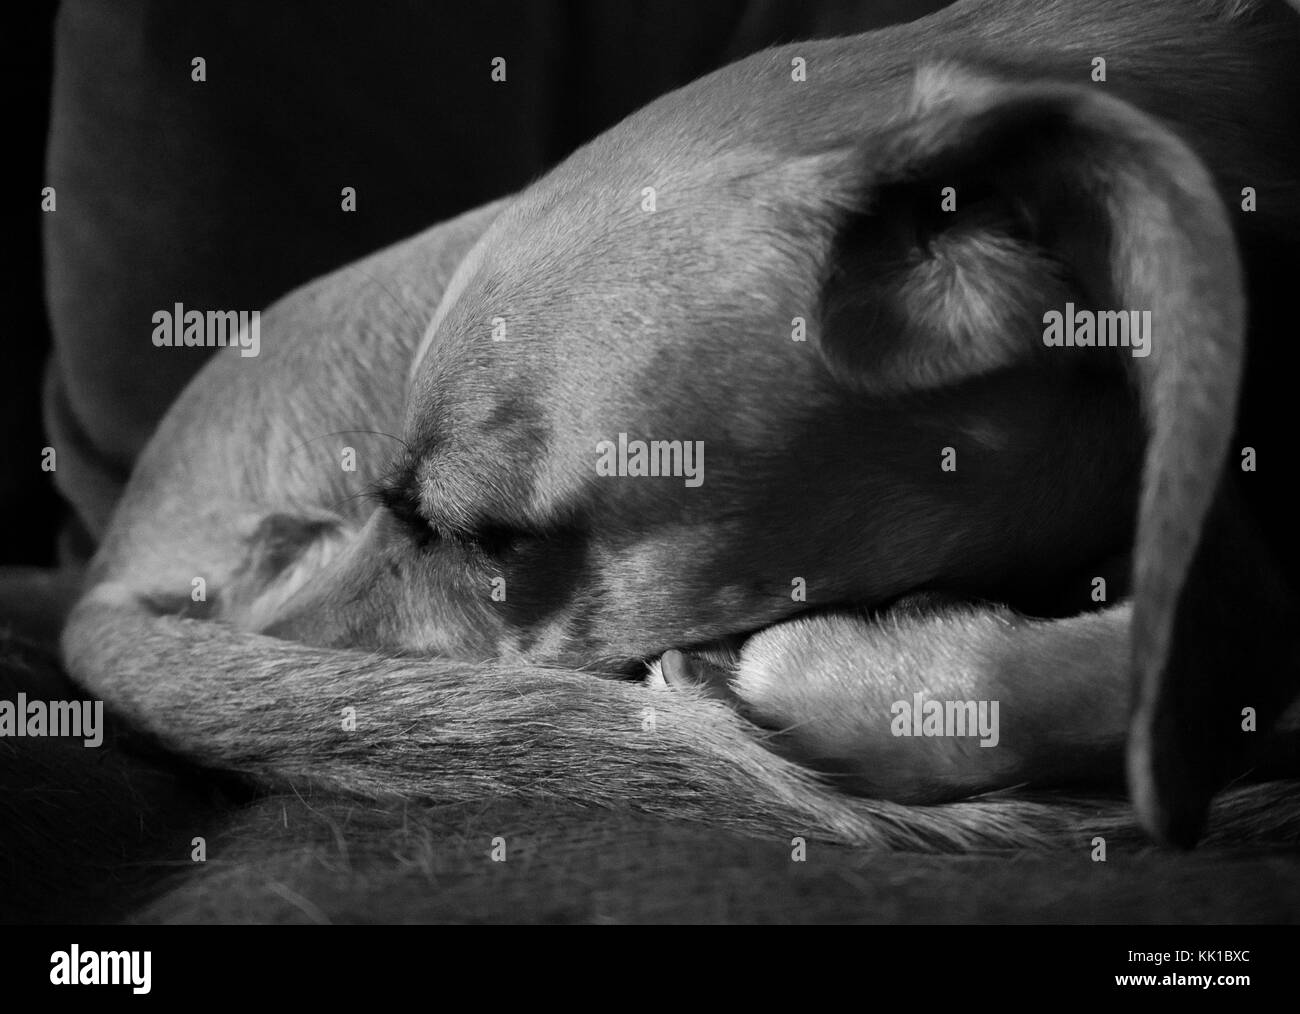 Close up of a sleeping dog's head in black and white Stock Photo